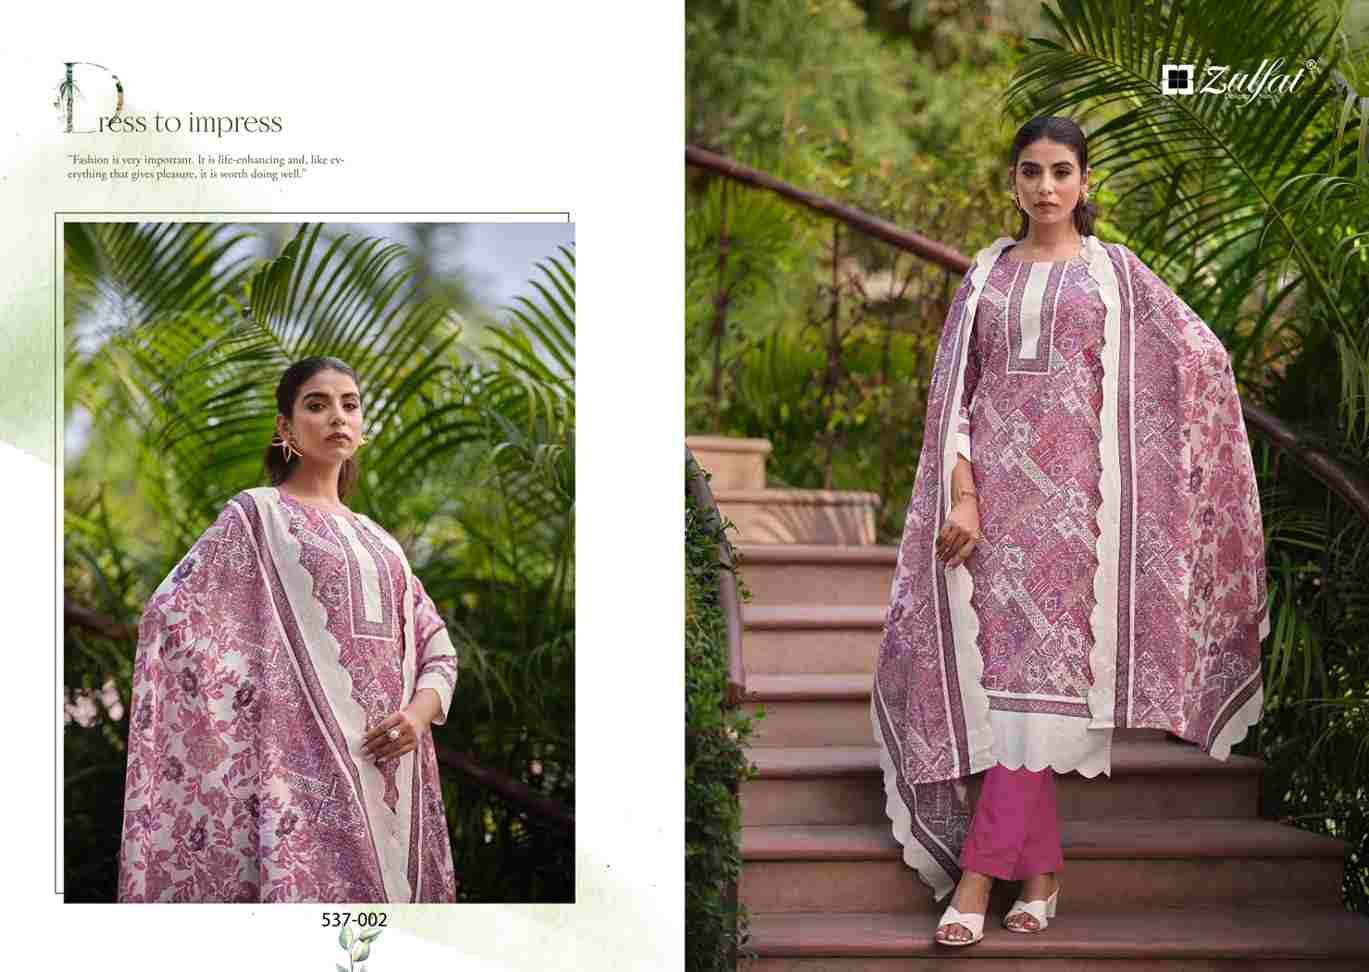 Maryam Vol-2 By Zulfat 537-001 To 537-008 Series Beautiful Festive Suits Stylish Fancy Colorful Casual Wear & Ethnic Wear Pure Cotton Print Dresses At Wholesale Price